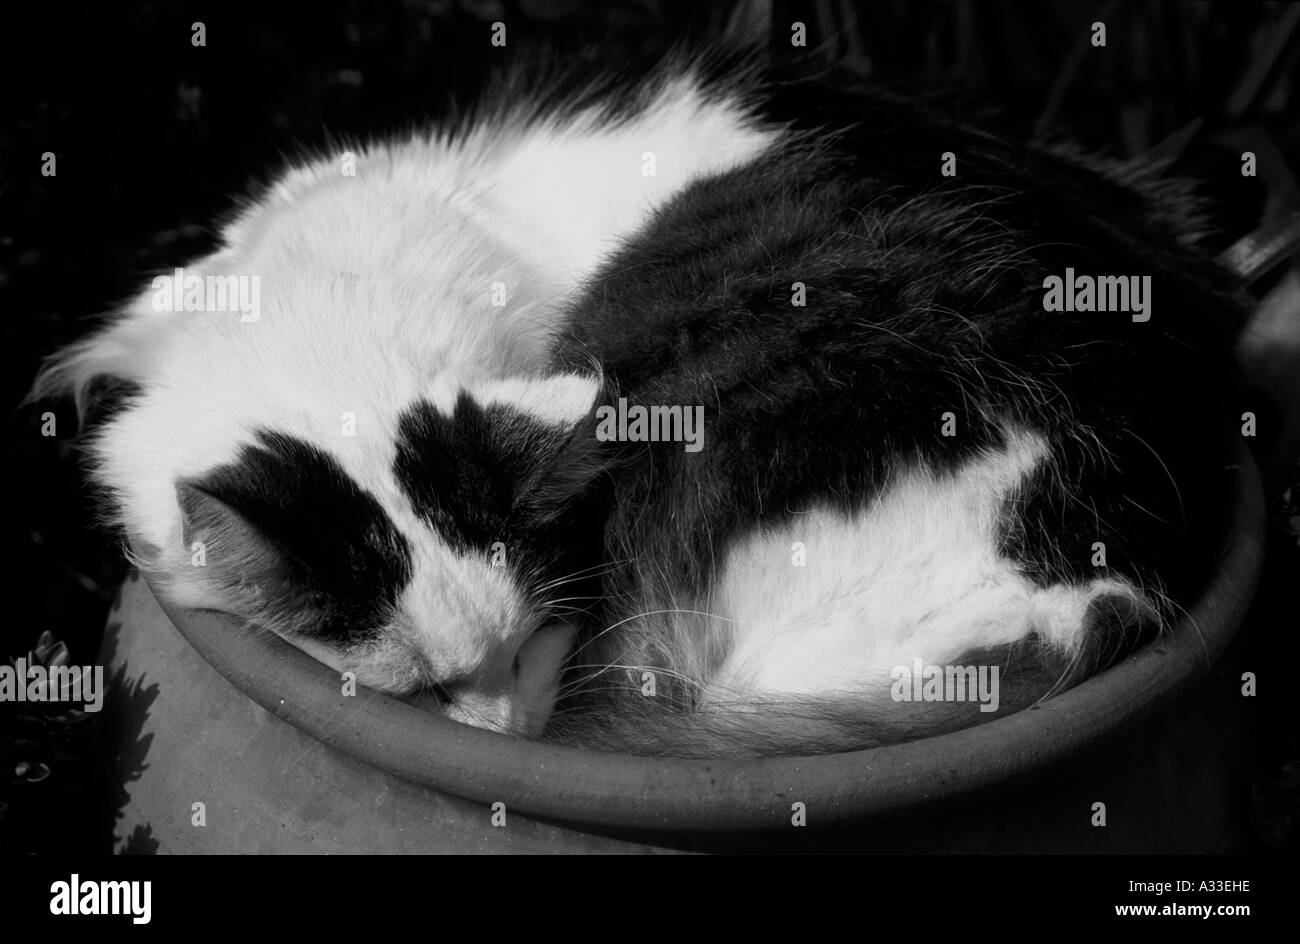 Black and White Cat Curled up in a Garden Pot Stock Photo